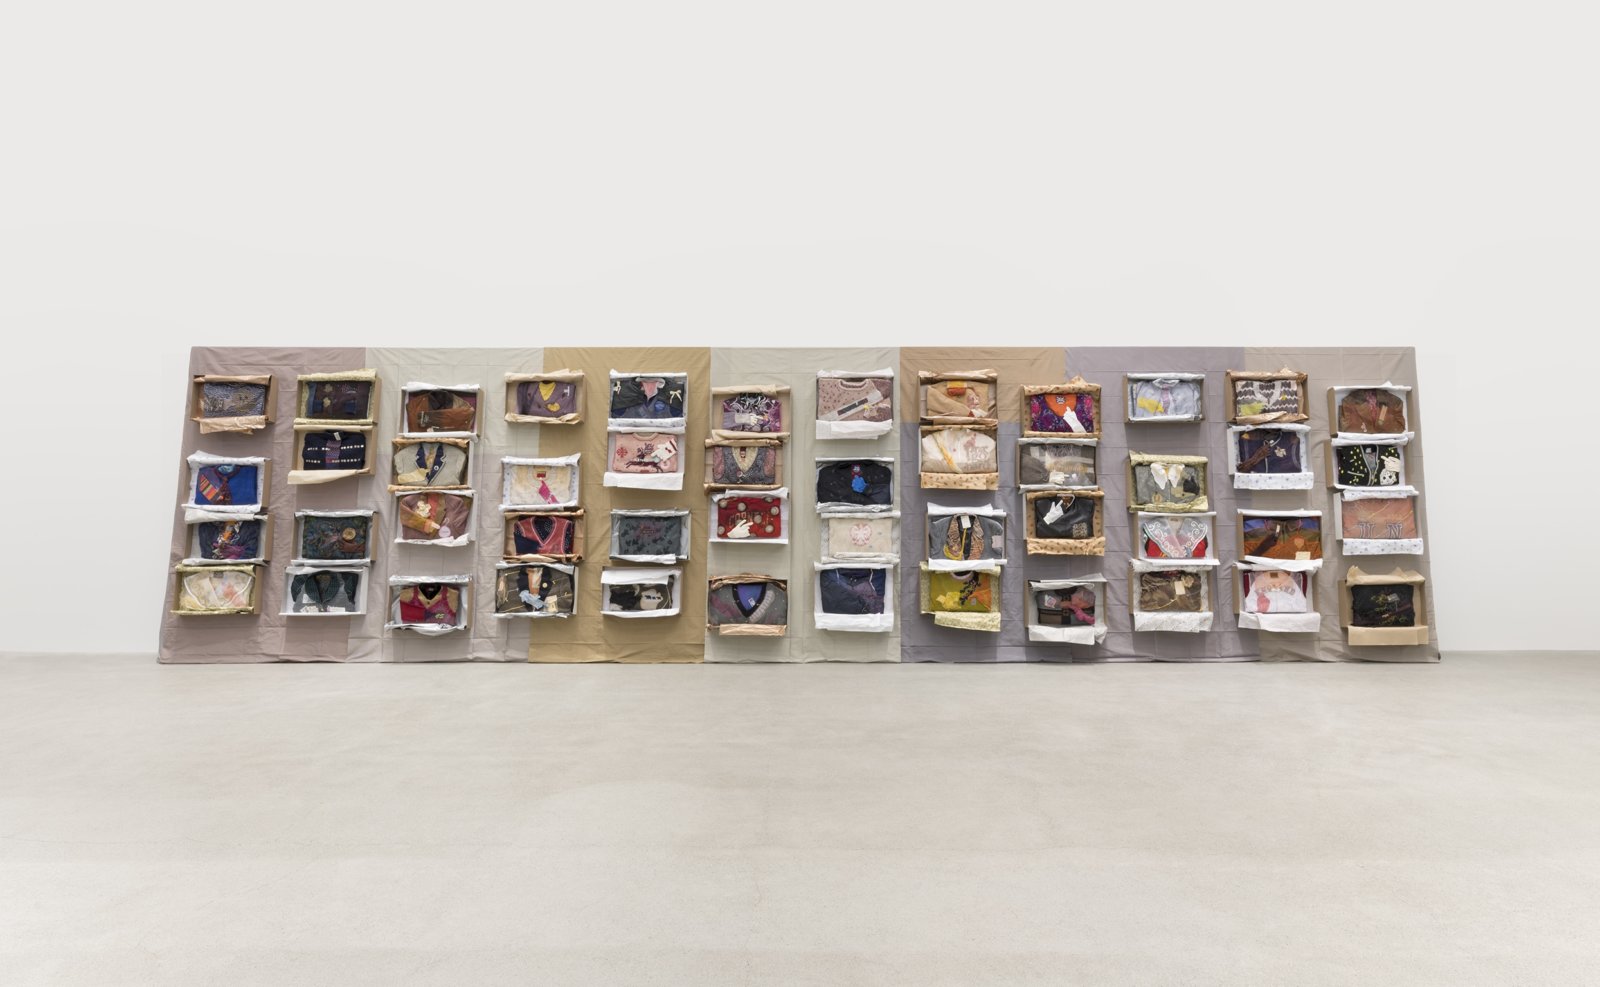 Liz Magor, Being This, 2012–2019, paper, textiles, found materials, 96 x 432 x 22 in. (244 x 1097 x 56 cm)